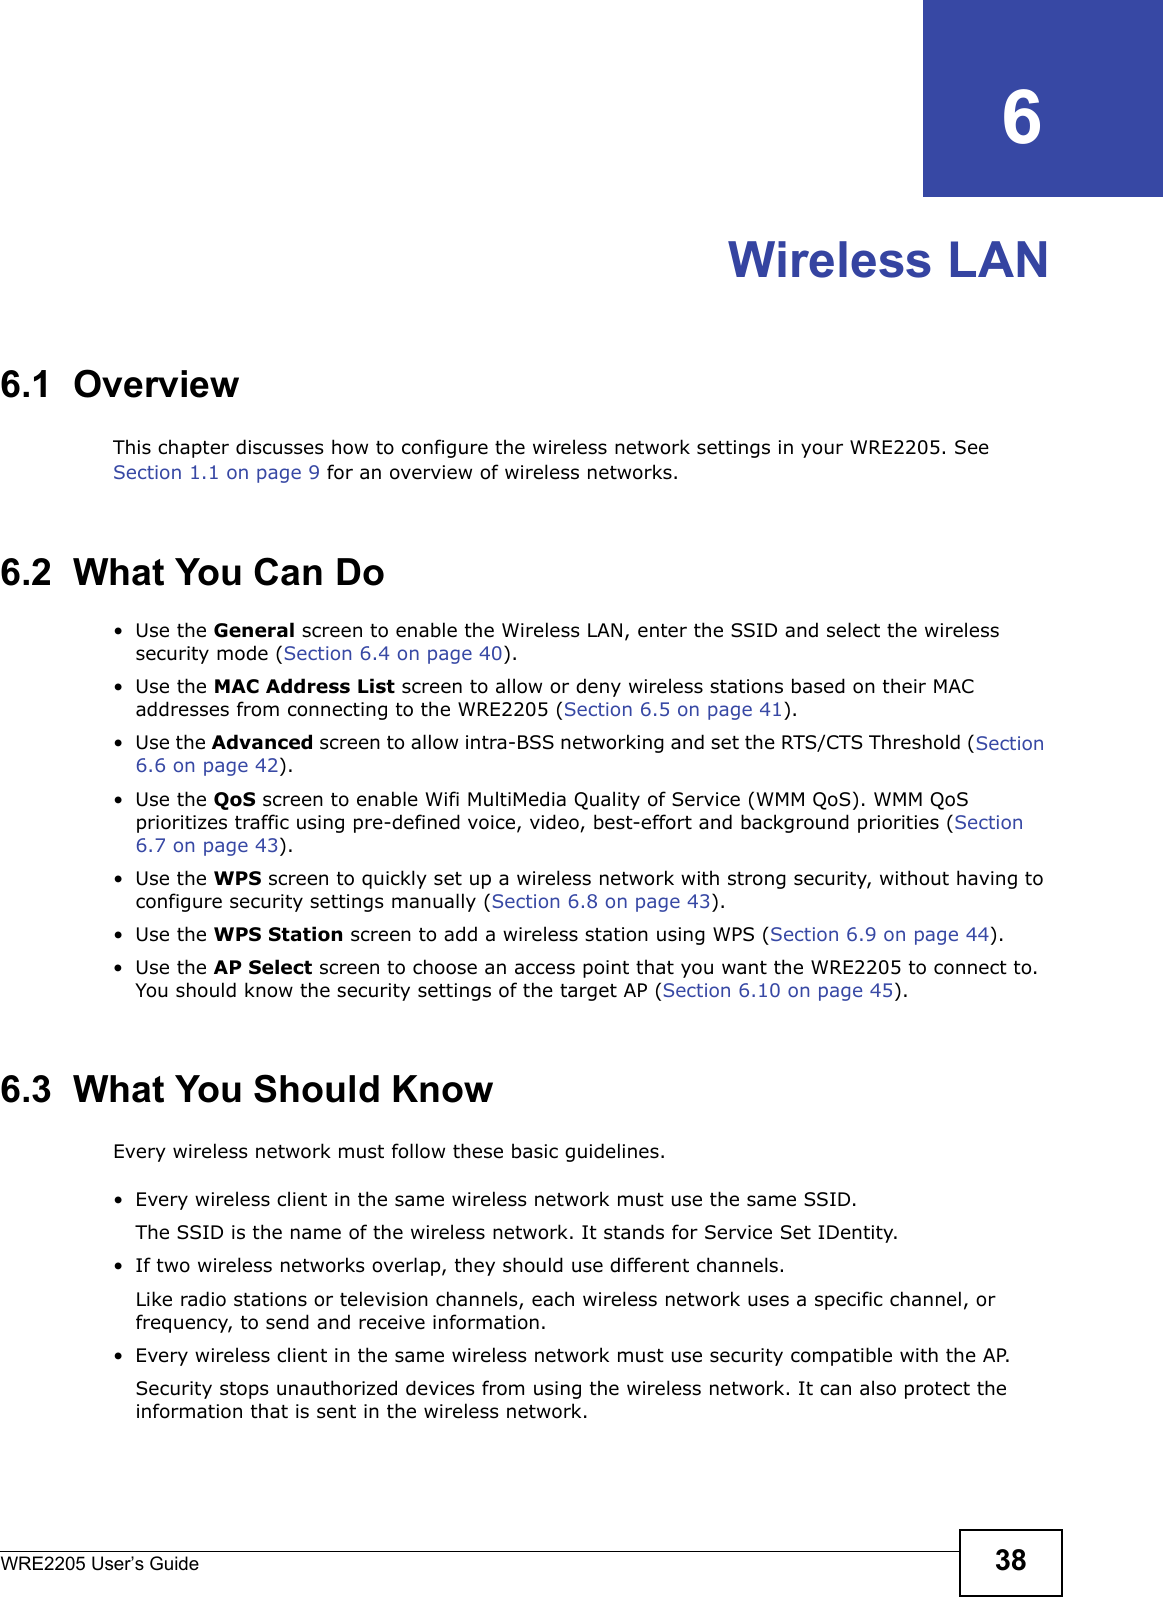 WRE2205 User’s Guide 38CHAPTER   6Wireless LAN6.1  OverviewThis chapter discusses how to configure the wireless network settings in your WRE2205. See Section 1.1 on page 9 for an overview of wireless networks.6.2  What You Can Do•Use the General screen to enable the Wireless LAN, enter the SSID and select the wireless security mode (Section 6.4 on page 40).•Use the MAC Address List screen to allow or deny wireless stations based on their MAC addresses from connecting to the WRE2205 (Section 6.5 on page 41).•Use the Advanced screen to allow intra-BSS networking and set the RTS/CTS Threshold (Section 6.6 on page 42).•Use the QoS screen to enable Wifi MultiMedia Quality of Service (WMM QoS). WMM QoS prioritizes traffic using pre-defined voice, video, best-effort and background priorities (Section 6.7 on page 43).•Use the WPS screen to quickly set up a wireless network with strong security, without having to configure security settings manually (Section 6.8 on page 43).•Use the WPS Station screen to add a wireless station using WPS (Section 6.9 on page 44). •Use the AP Select screen to choose an access point that you want the WRE2205 to connect to. You should know the security settings of the target AP (Section 6.10 on page 45).6.3  What You Should KnowEvery wireless network must follow these basic guidelines.• Every wireless client in the same wireless network must use the same SSID.The SSID is the name of the wireless network. It stands for Service Set IDentity.• If two wireless networks overlap, they should use different channels.Like radio stations or television channels, each wireless network uses a specific channel, or frequency, to send and receive information.• Every wireless client in the same wireless network must use security compatible with the AP.Security stops unauthorized devices from using the wireless network. It can also protect the information that is sent in the wireless network.